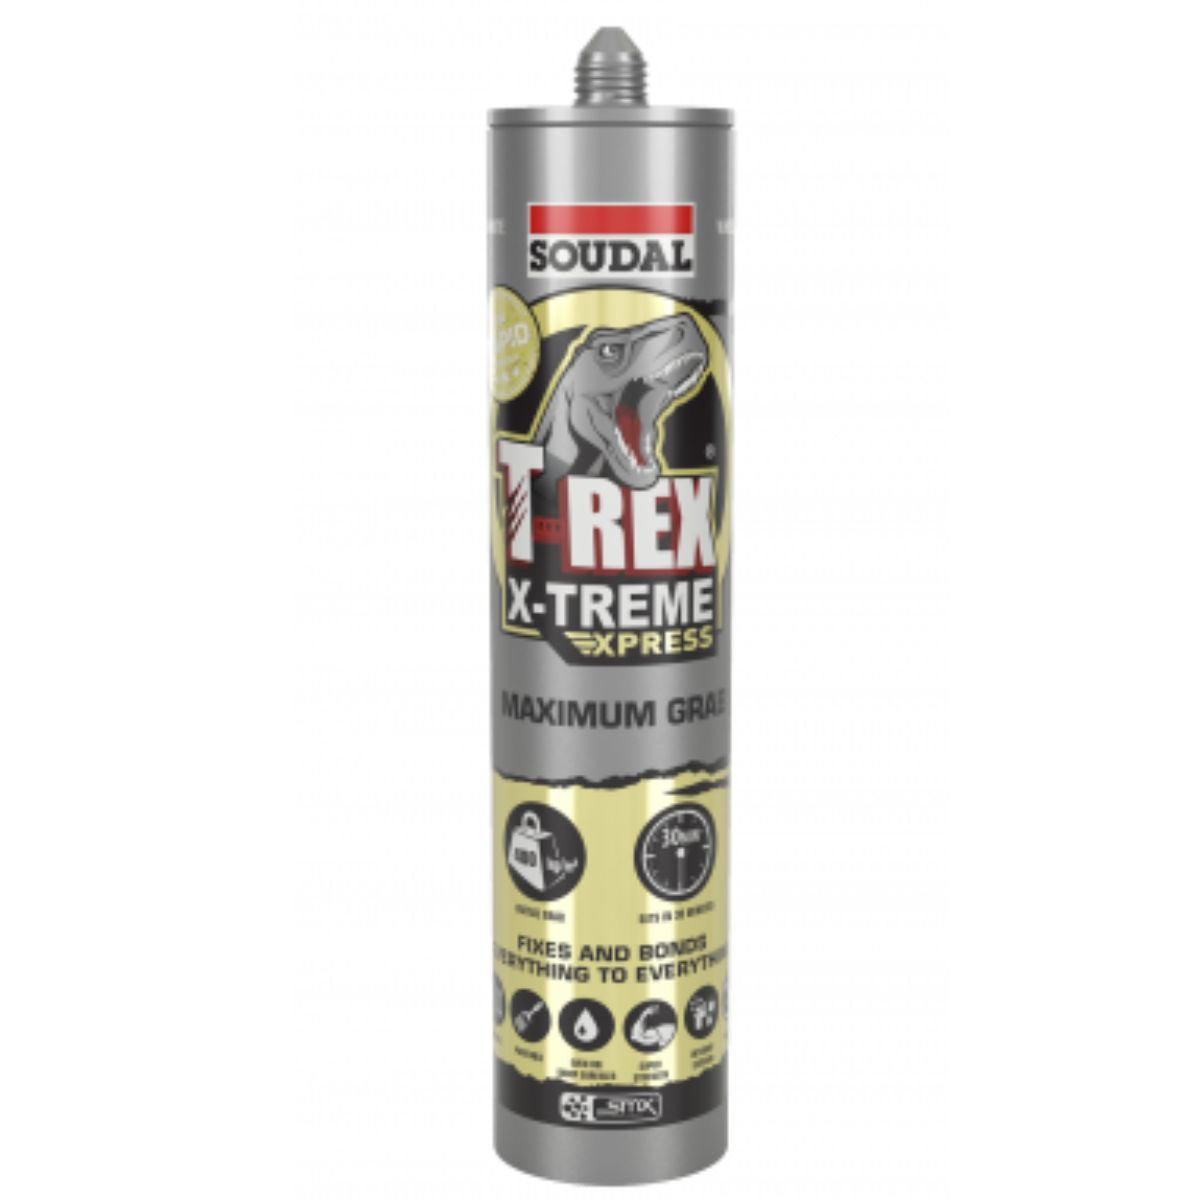 Soudal 134841 T-Rex X-TREME TACK Sealant and Adhesive White Sealant and Adhesive 290ml - South East Clearance Centre